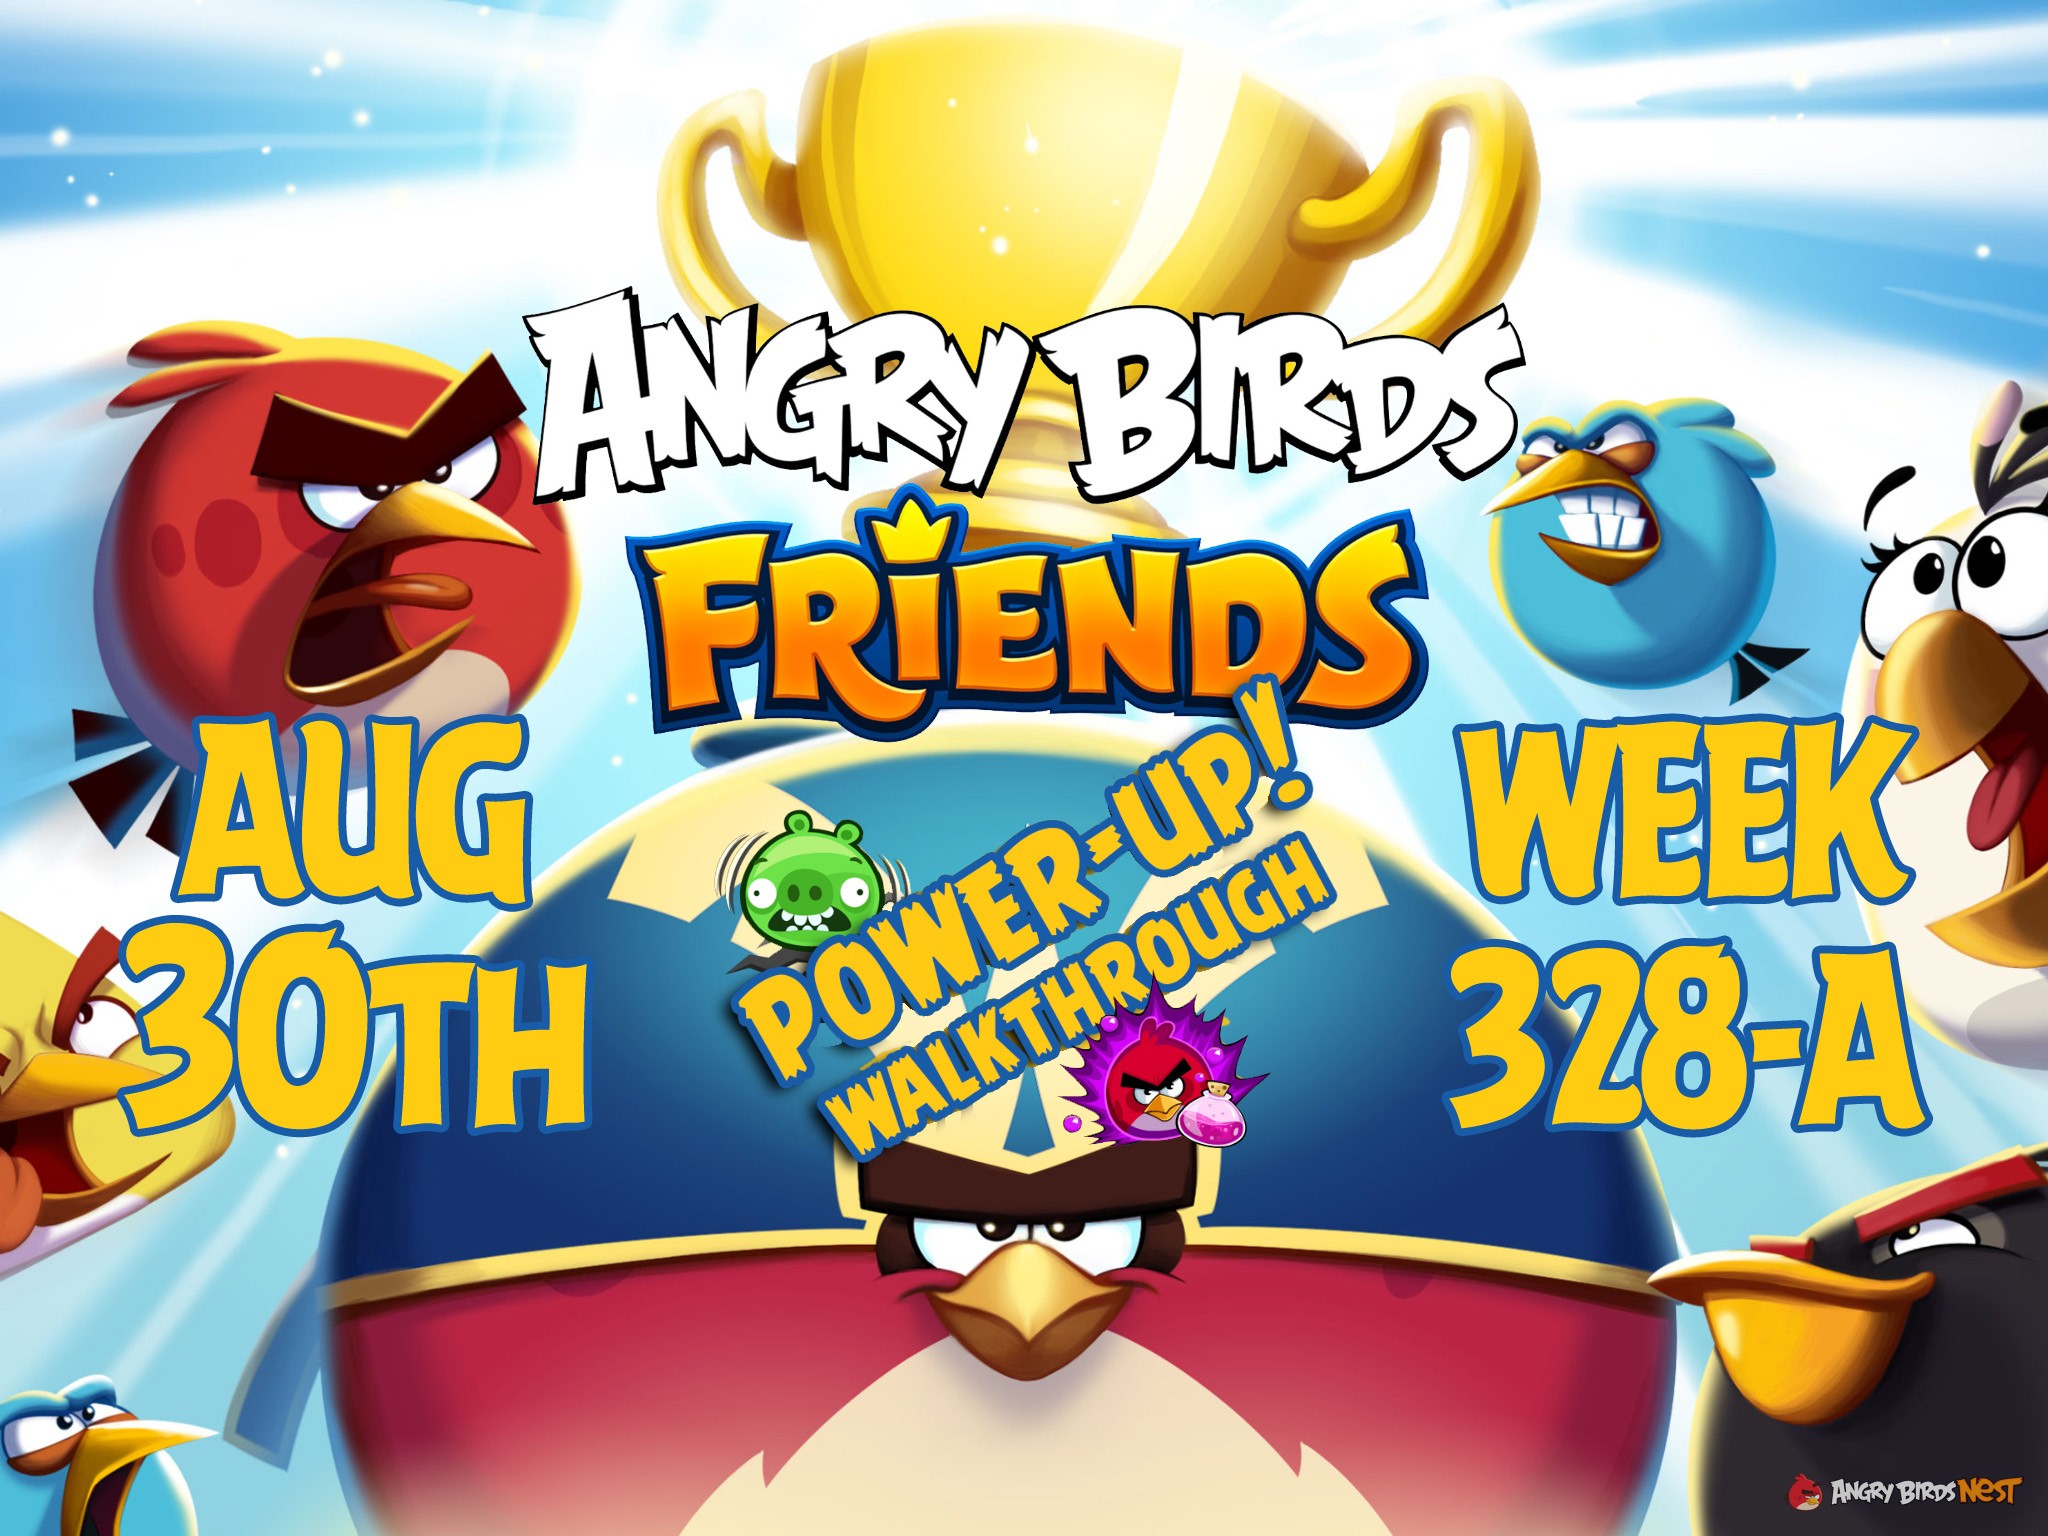 Angry-Birds-Friends-Tournament-Week-328-A-Feature-Image-PU